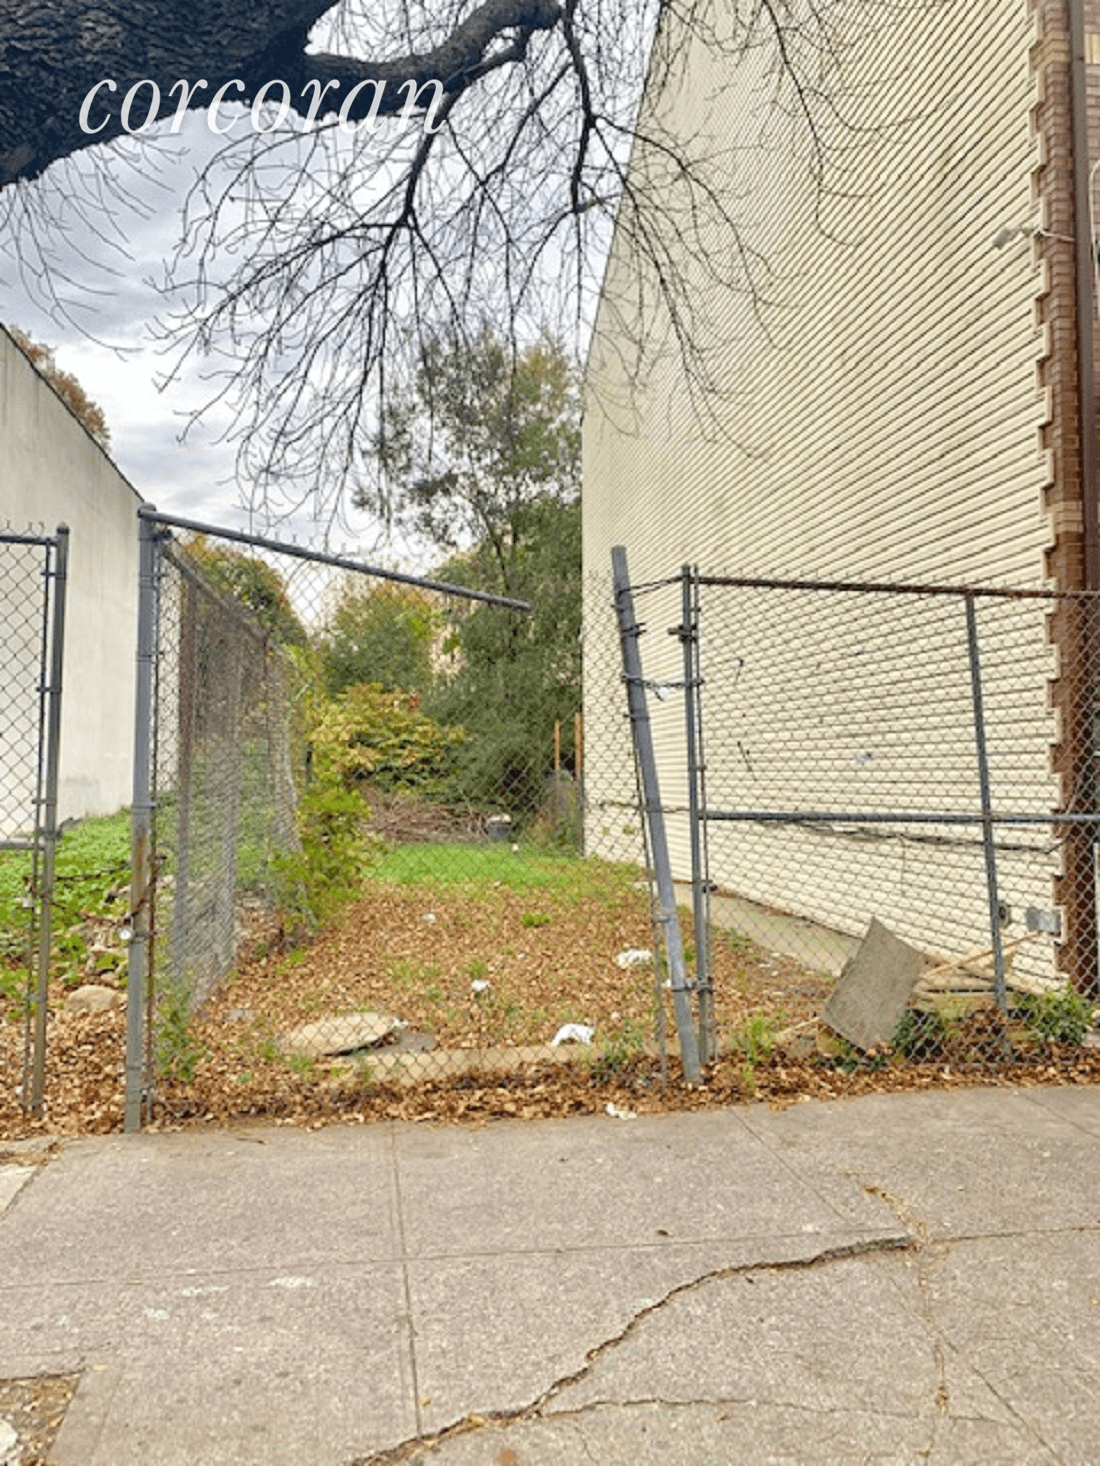 Prime Crown Heights Vacant lot for sale.